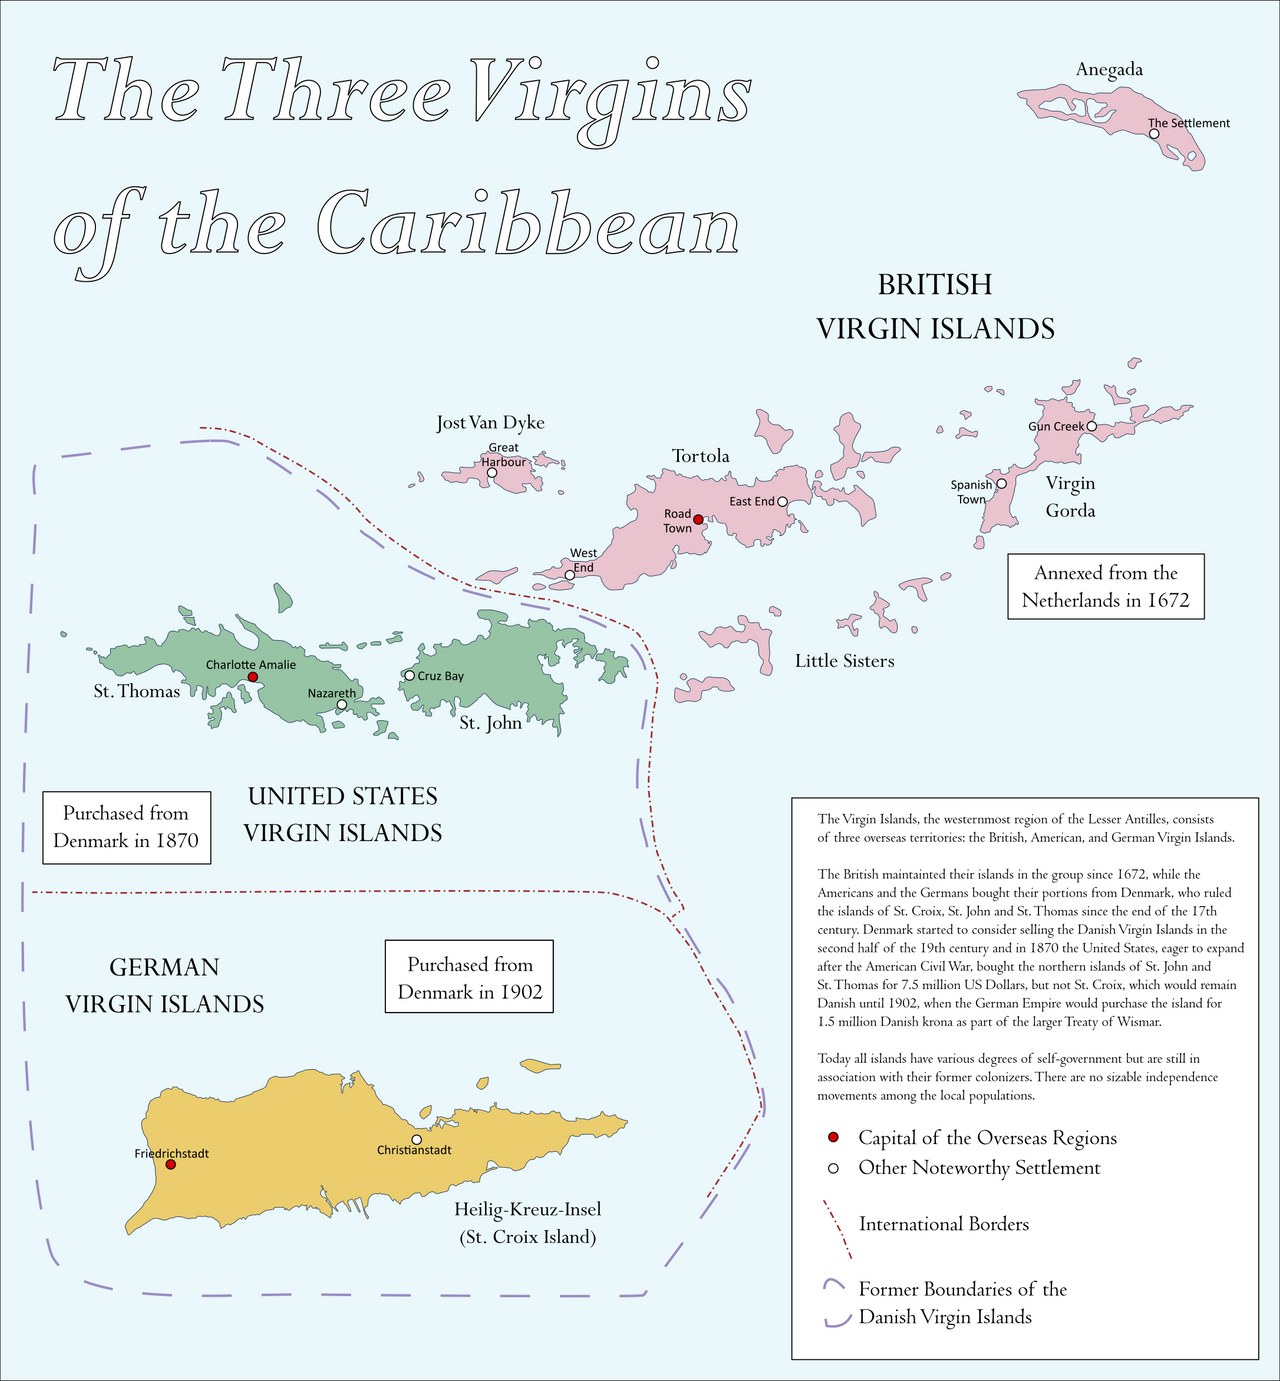 the_three_virgins_of_the_caribbean_by_federalrepublic_den20e5-fullview.png